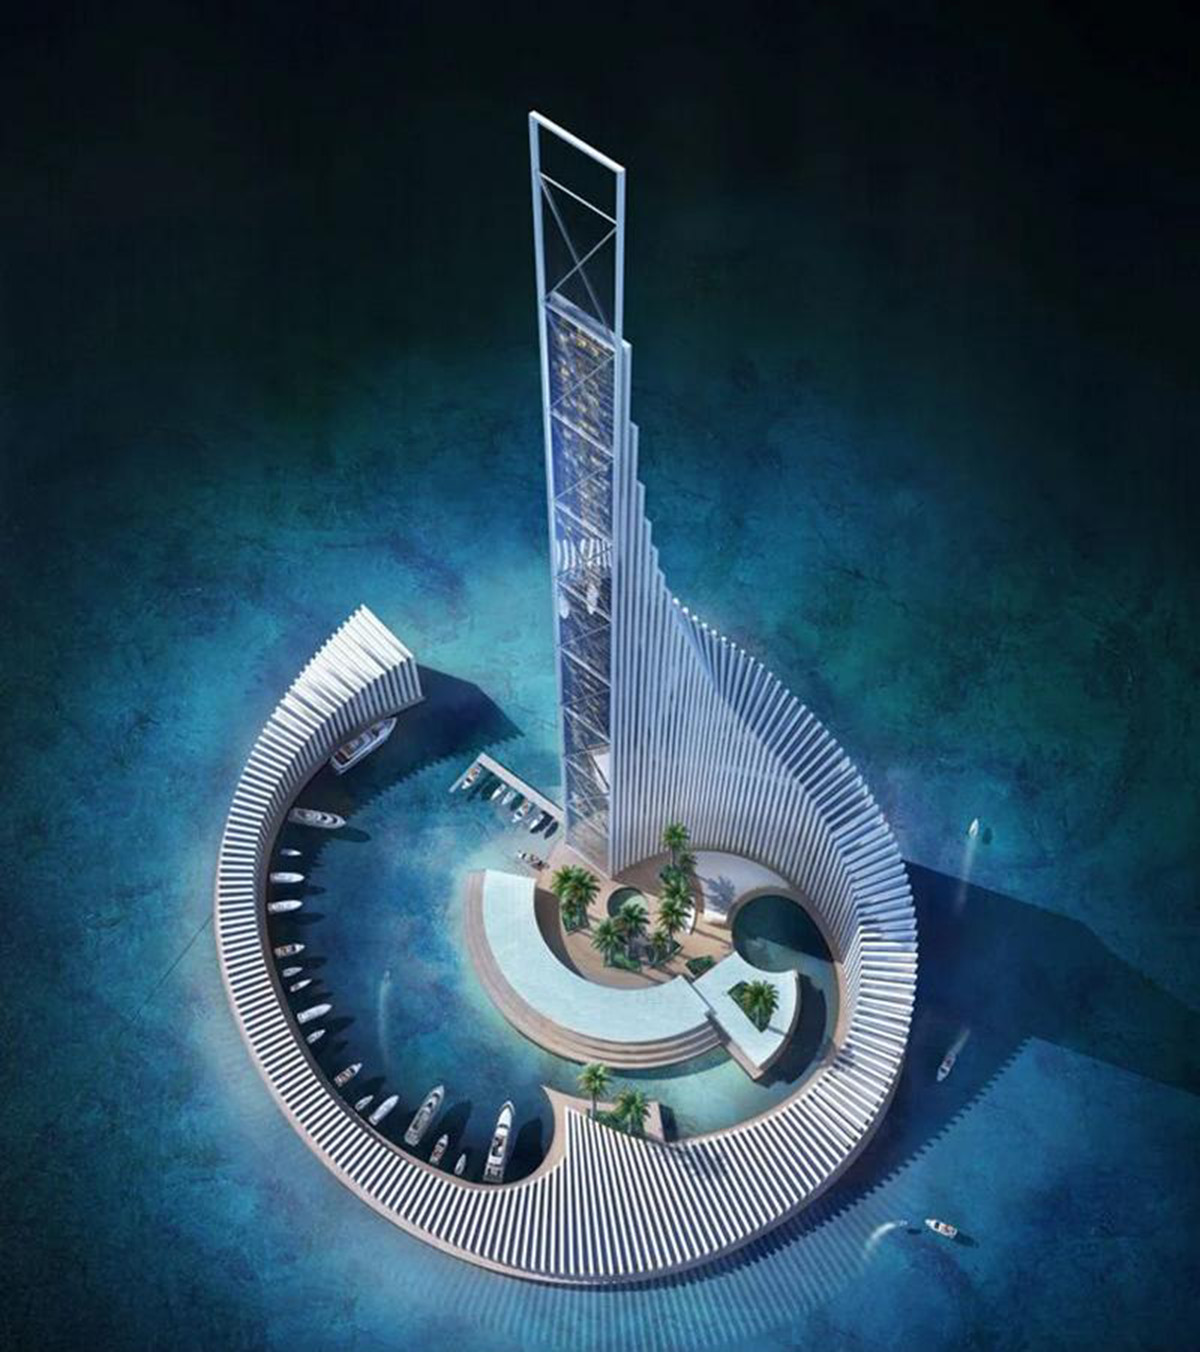 Images revealed for Zanzibar Domino Commercial Tower that will become Africa's second tallest tower